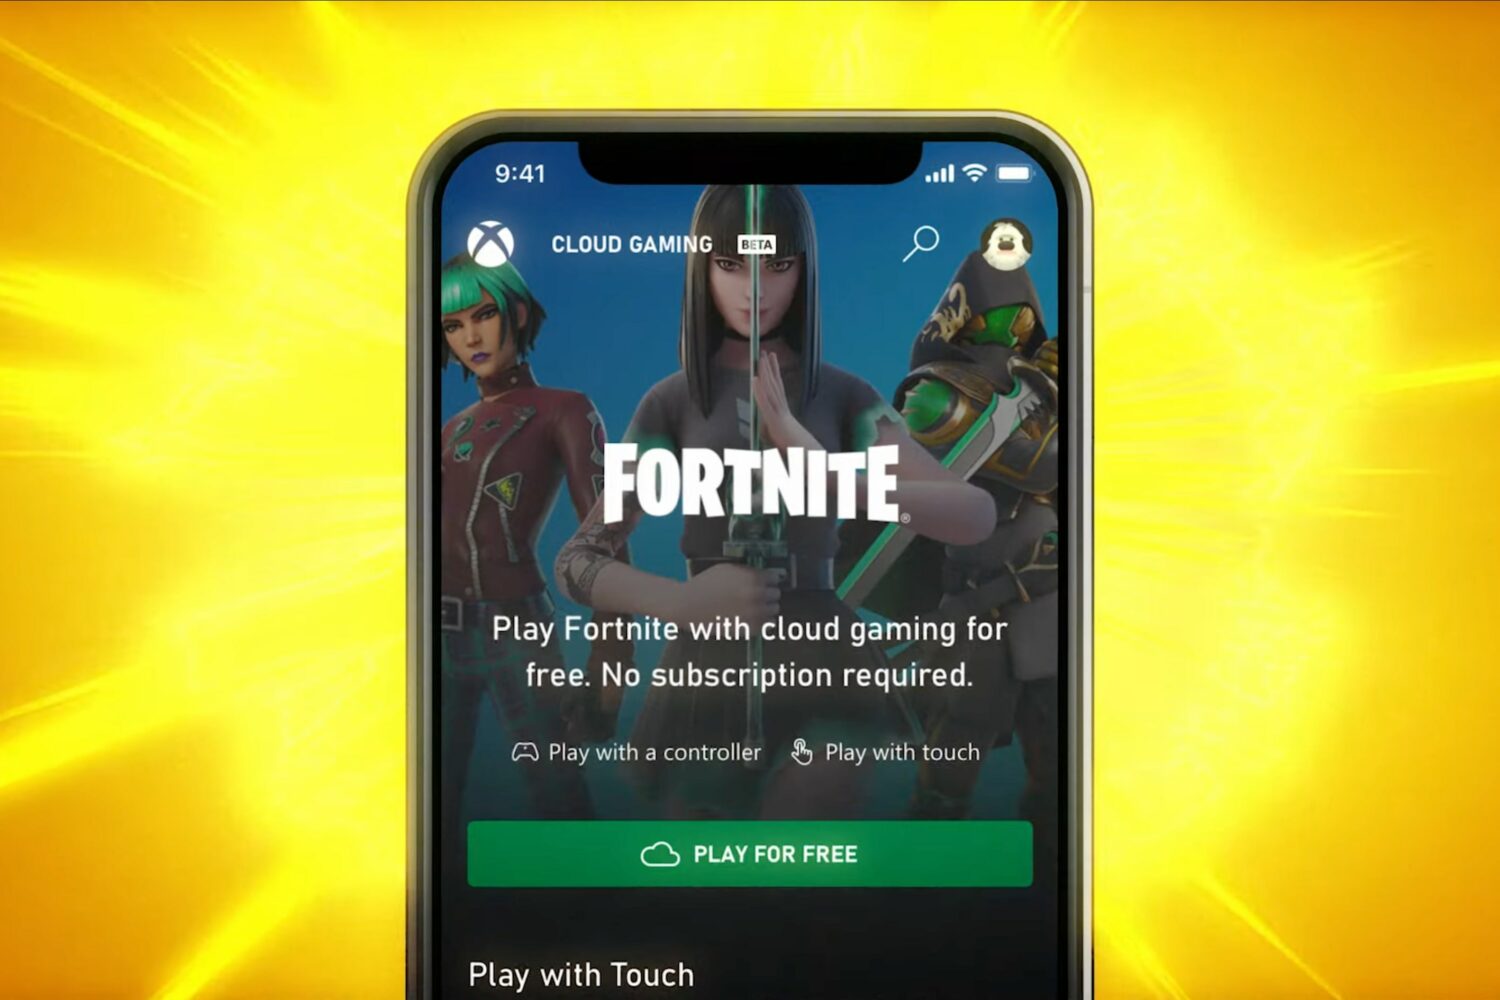 Marketing image showcasing the Fortnite page in Microsoft's Xbox Cloud Gaming service on iPhone